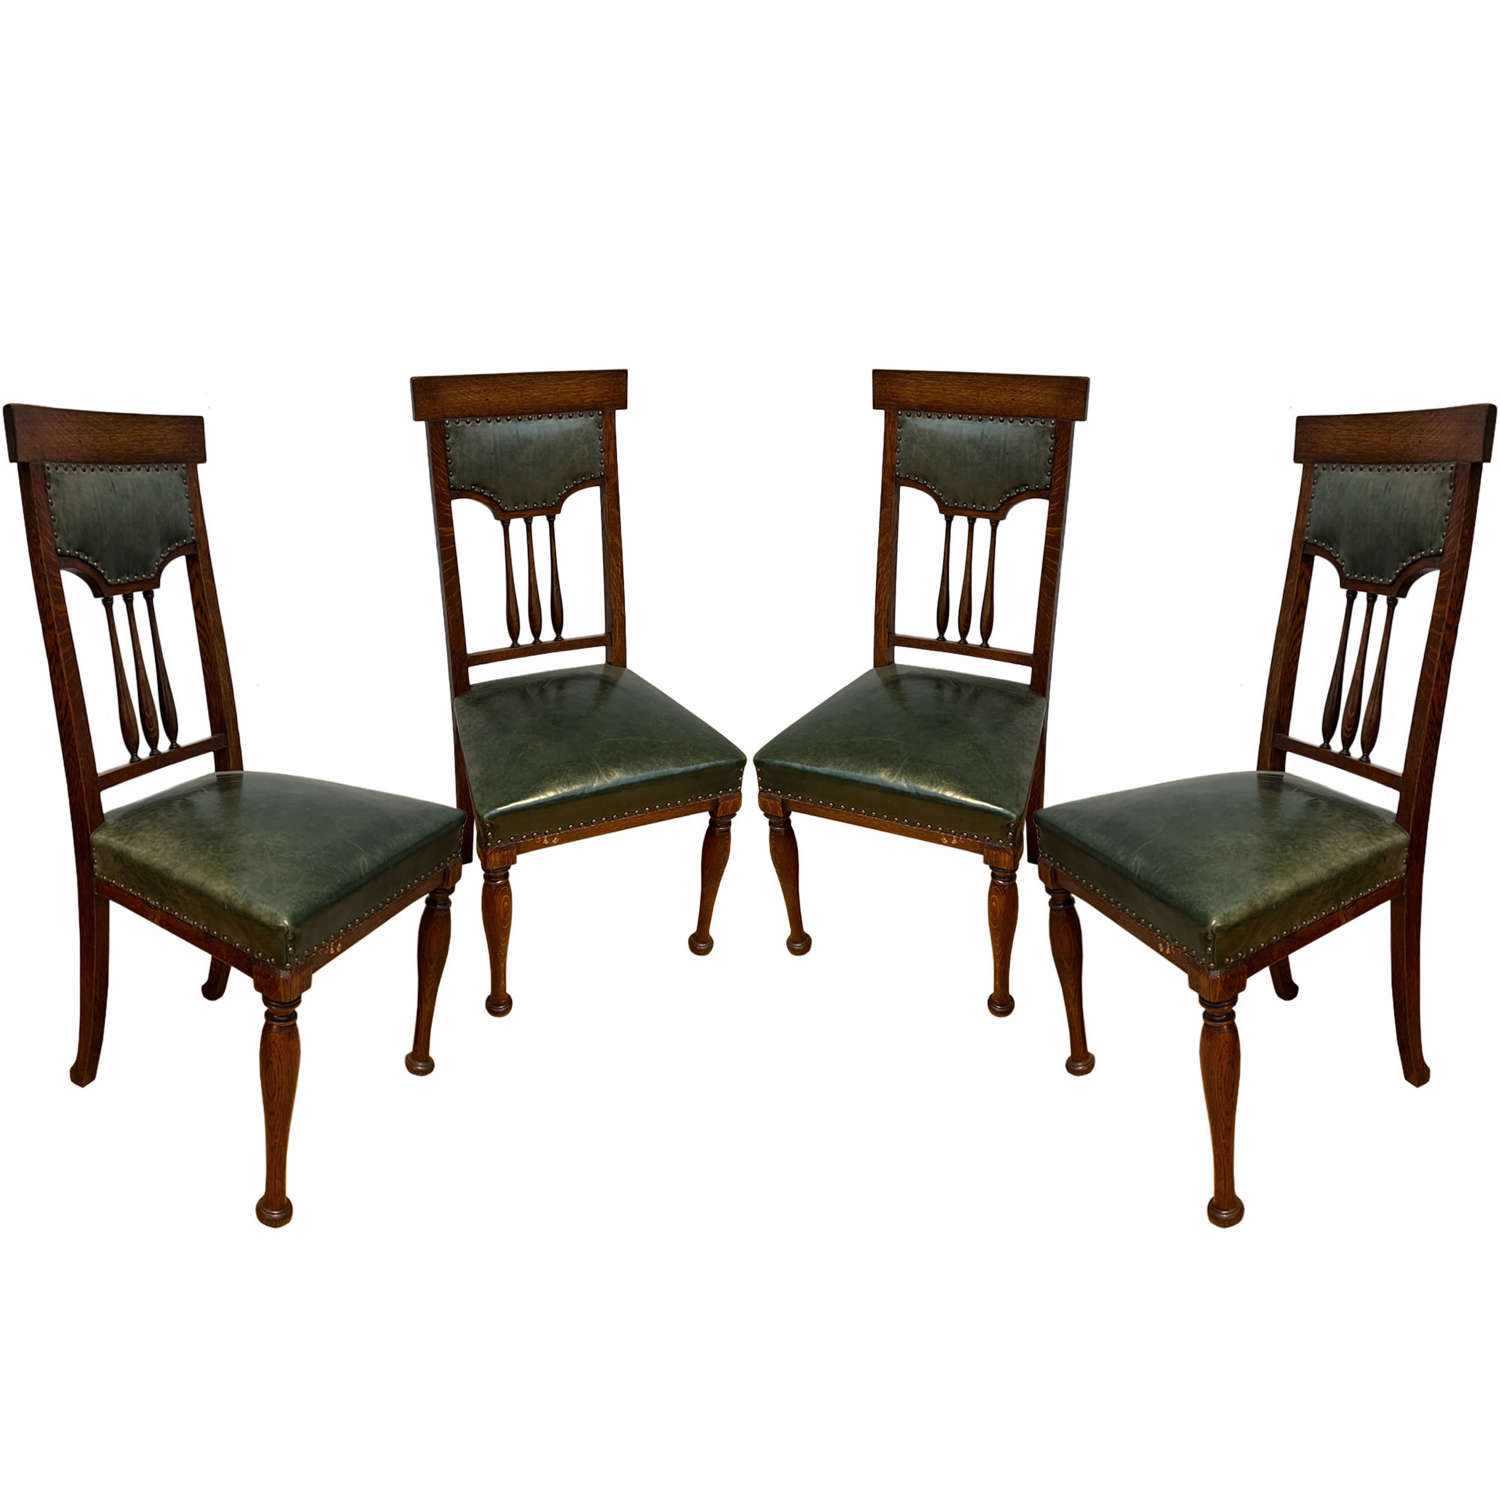 Set of 4 Oak and Leather Dining Chairs